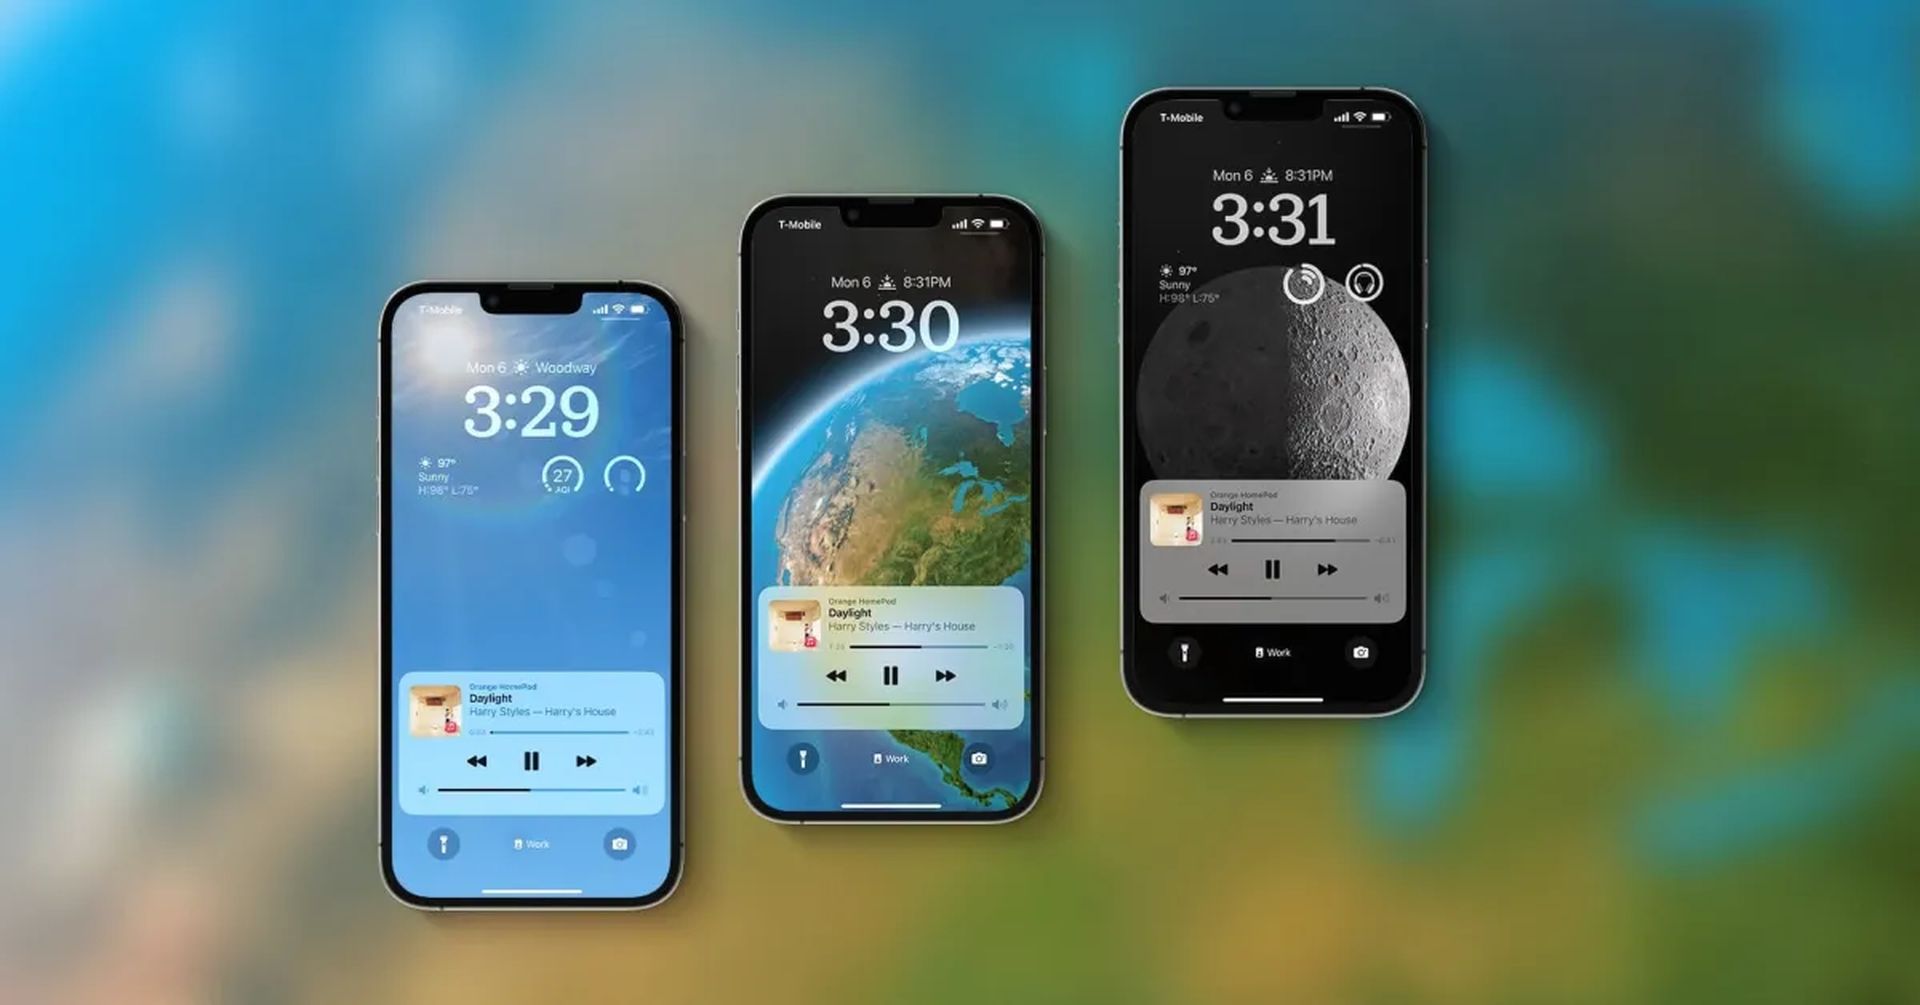 The whole world can now download and make use of the new iOS 16 features. Apple has issued its latest significant upgrade for iPhone owners worldwide after...